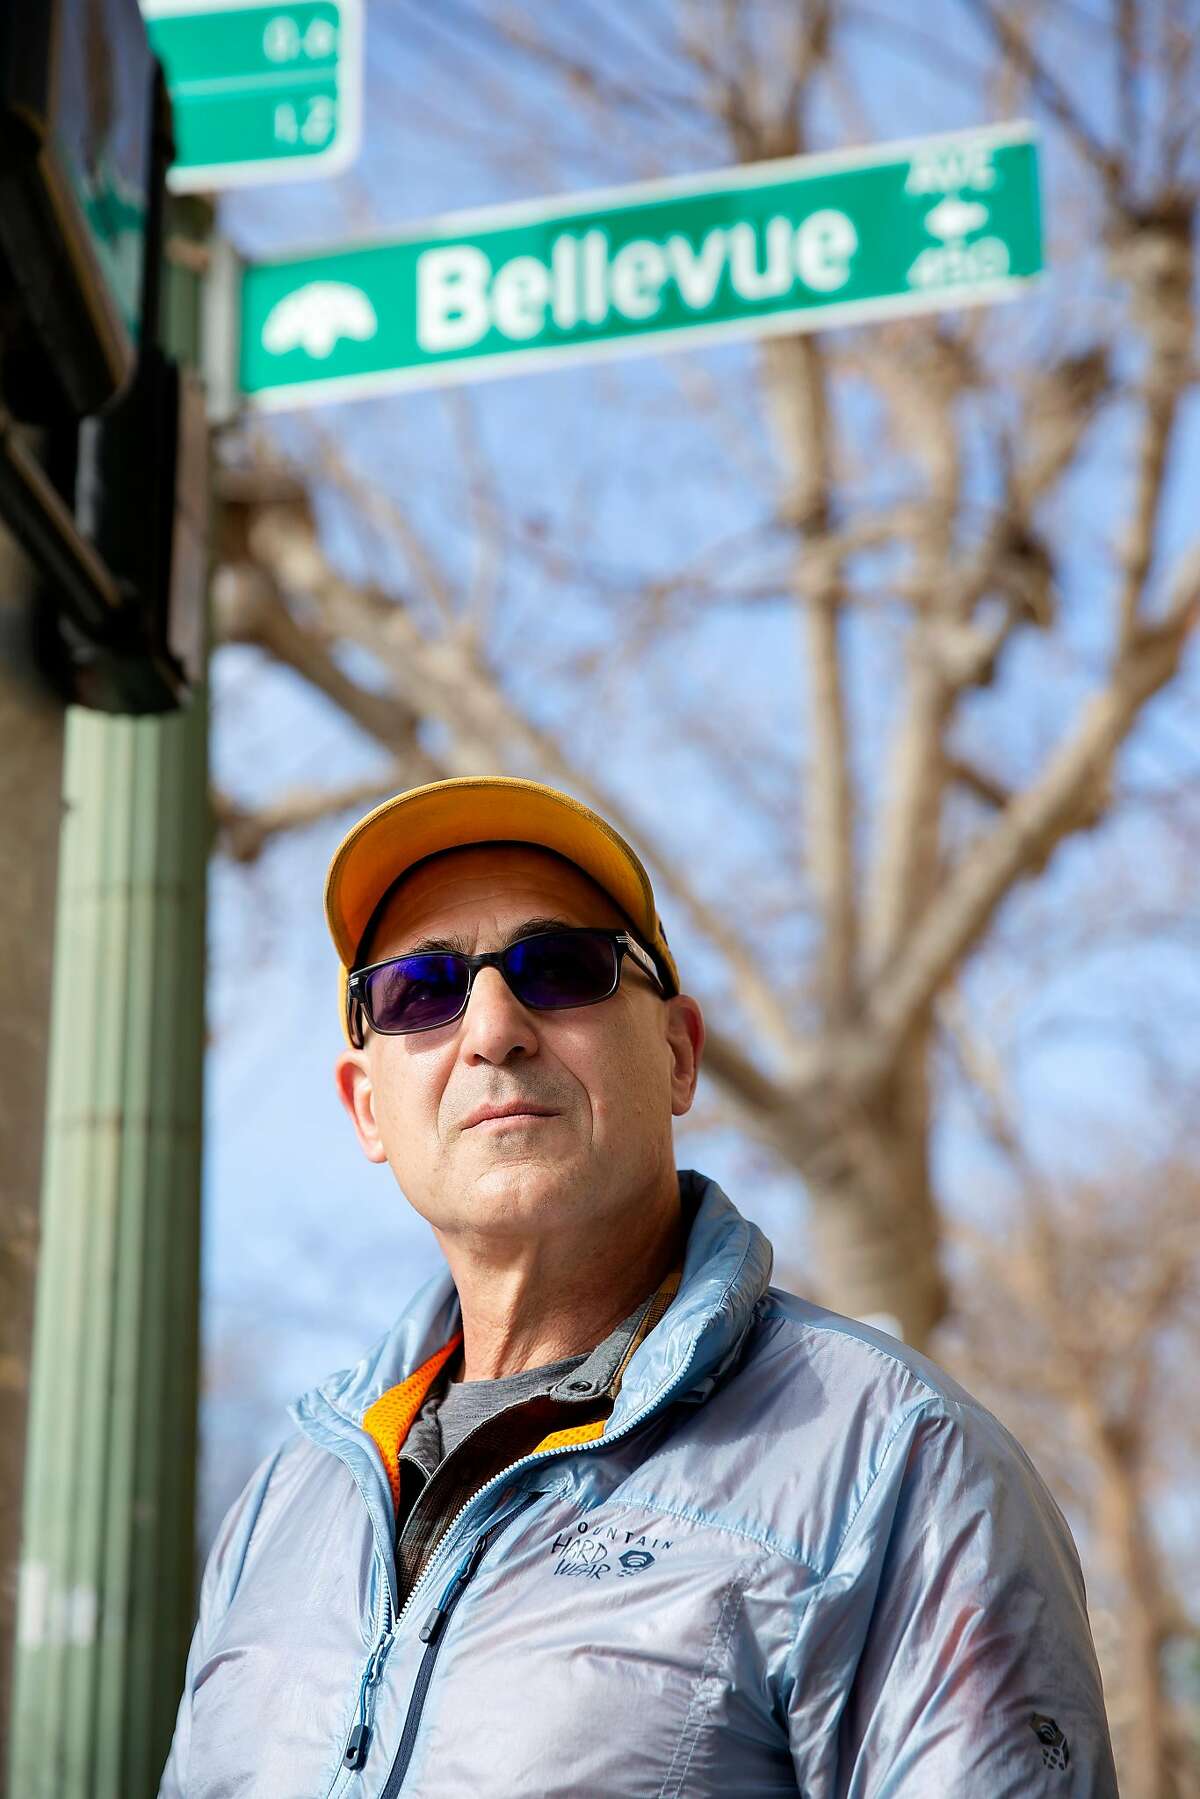 Randy Lyman stands outside of Perch, a local coffee shop he often frequents in Oakland, Calif. on Monday, January 27, 2020. Just across the street is the corner where Lyman was robbed at gun point just after midnight on January 18 at the corner of Grand Avenue and Bellevue Avenue in Oakland. After being punched in the face and held at gunpoint the robbers took both his wallet and phone before leaving in a nearby car. Lyman's robbery was one of many that have been occurring in Oakland involving getaway cars.